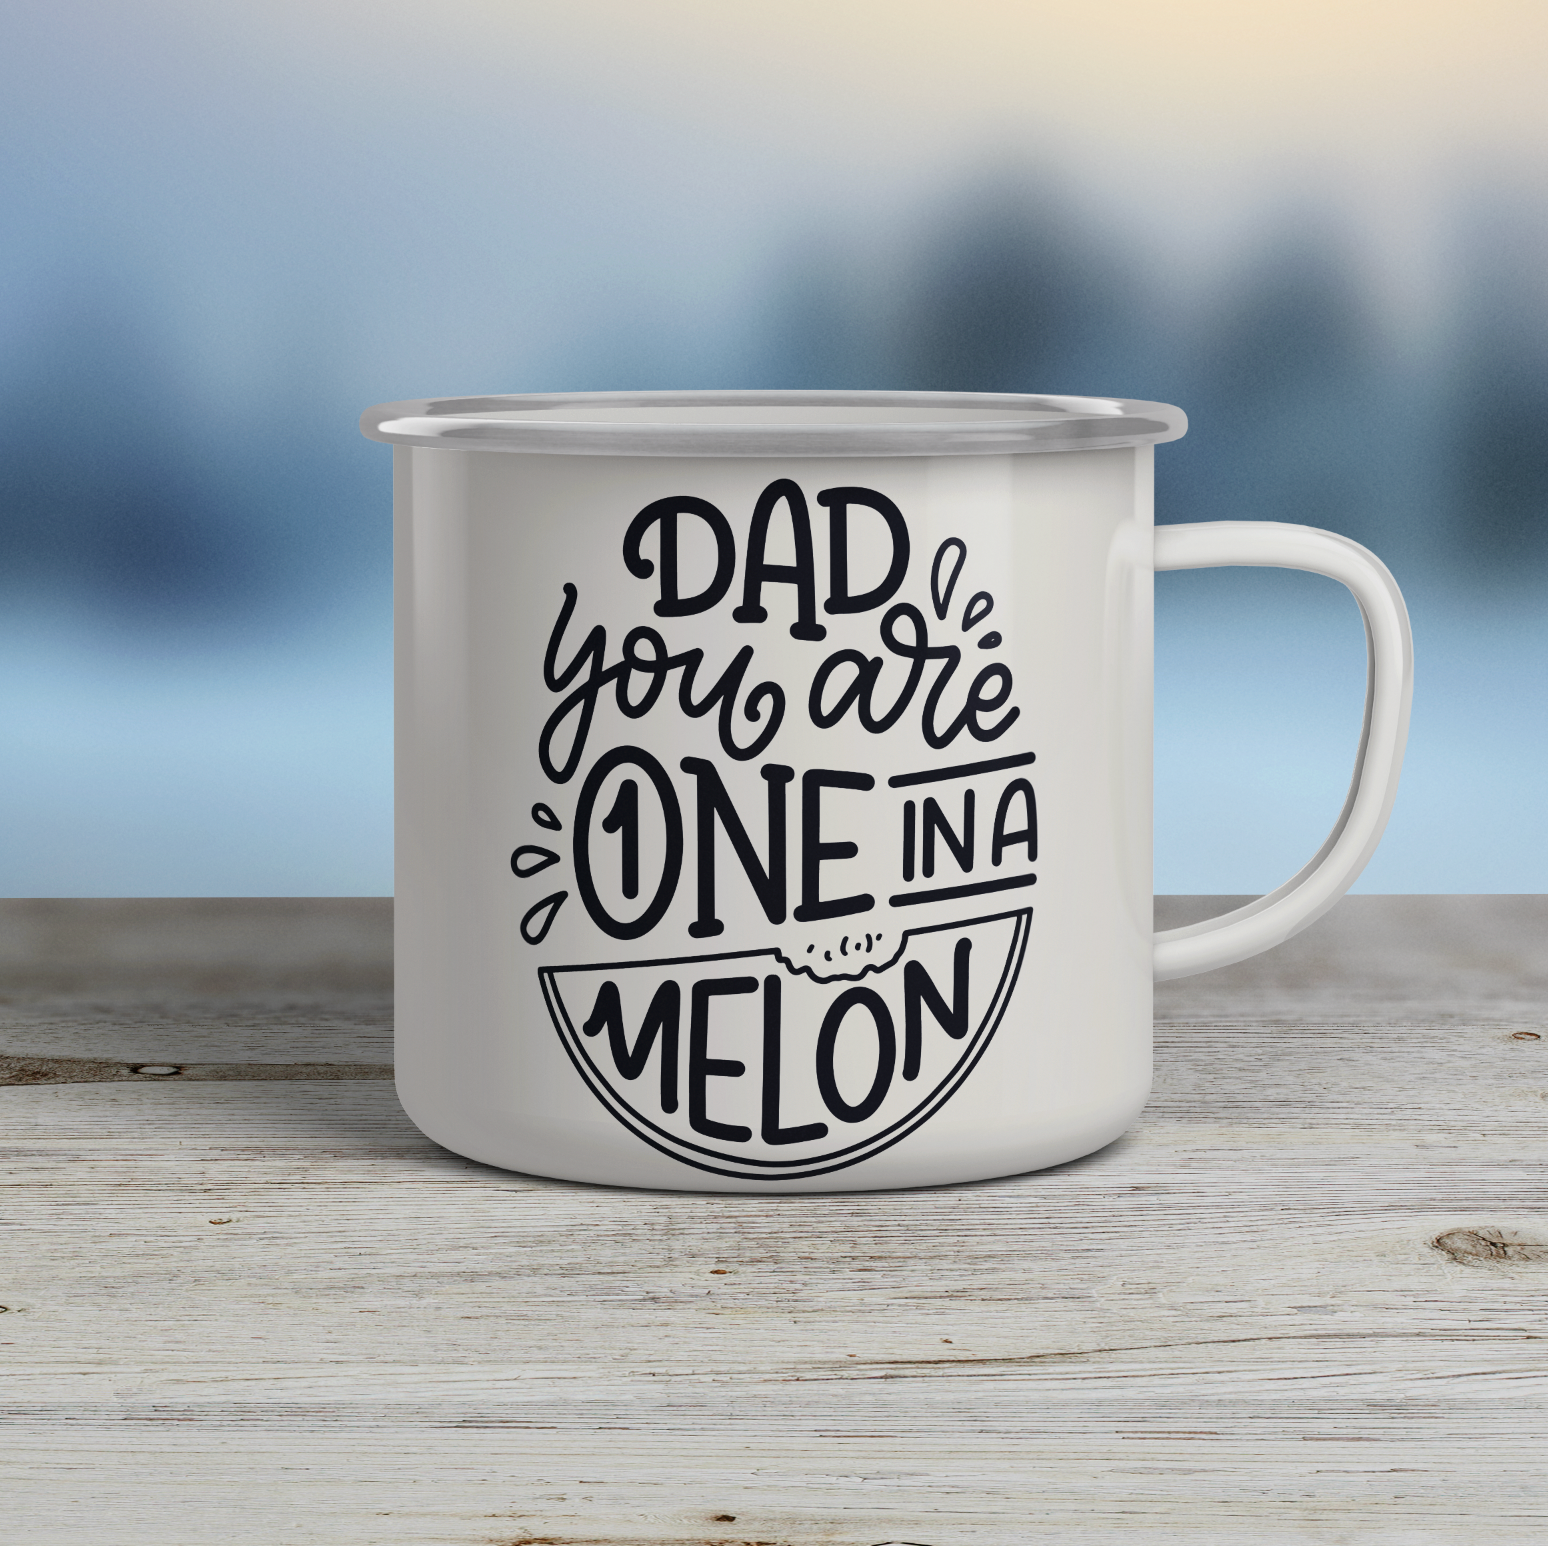 One in a Melon - Emaljmugg